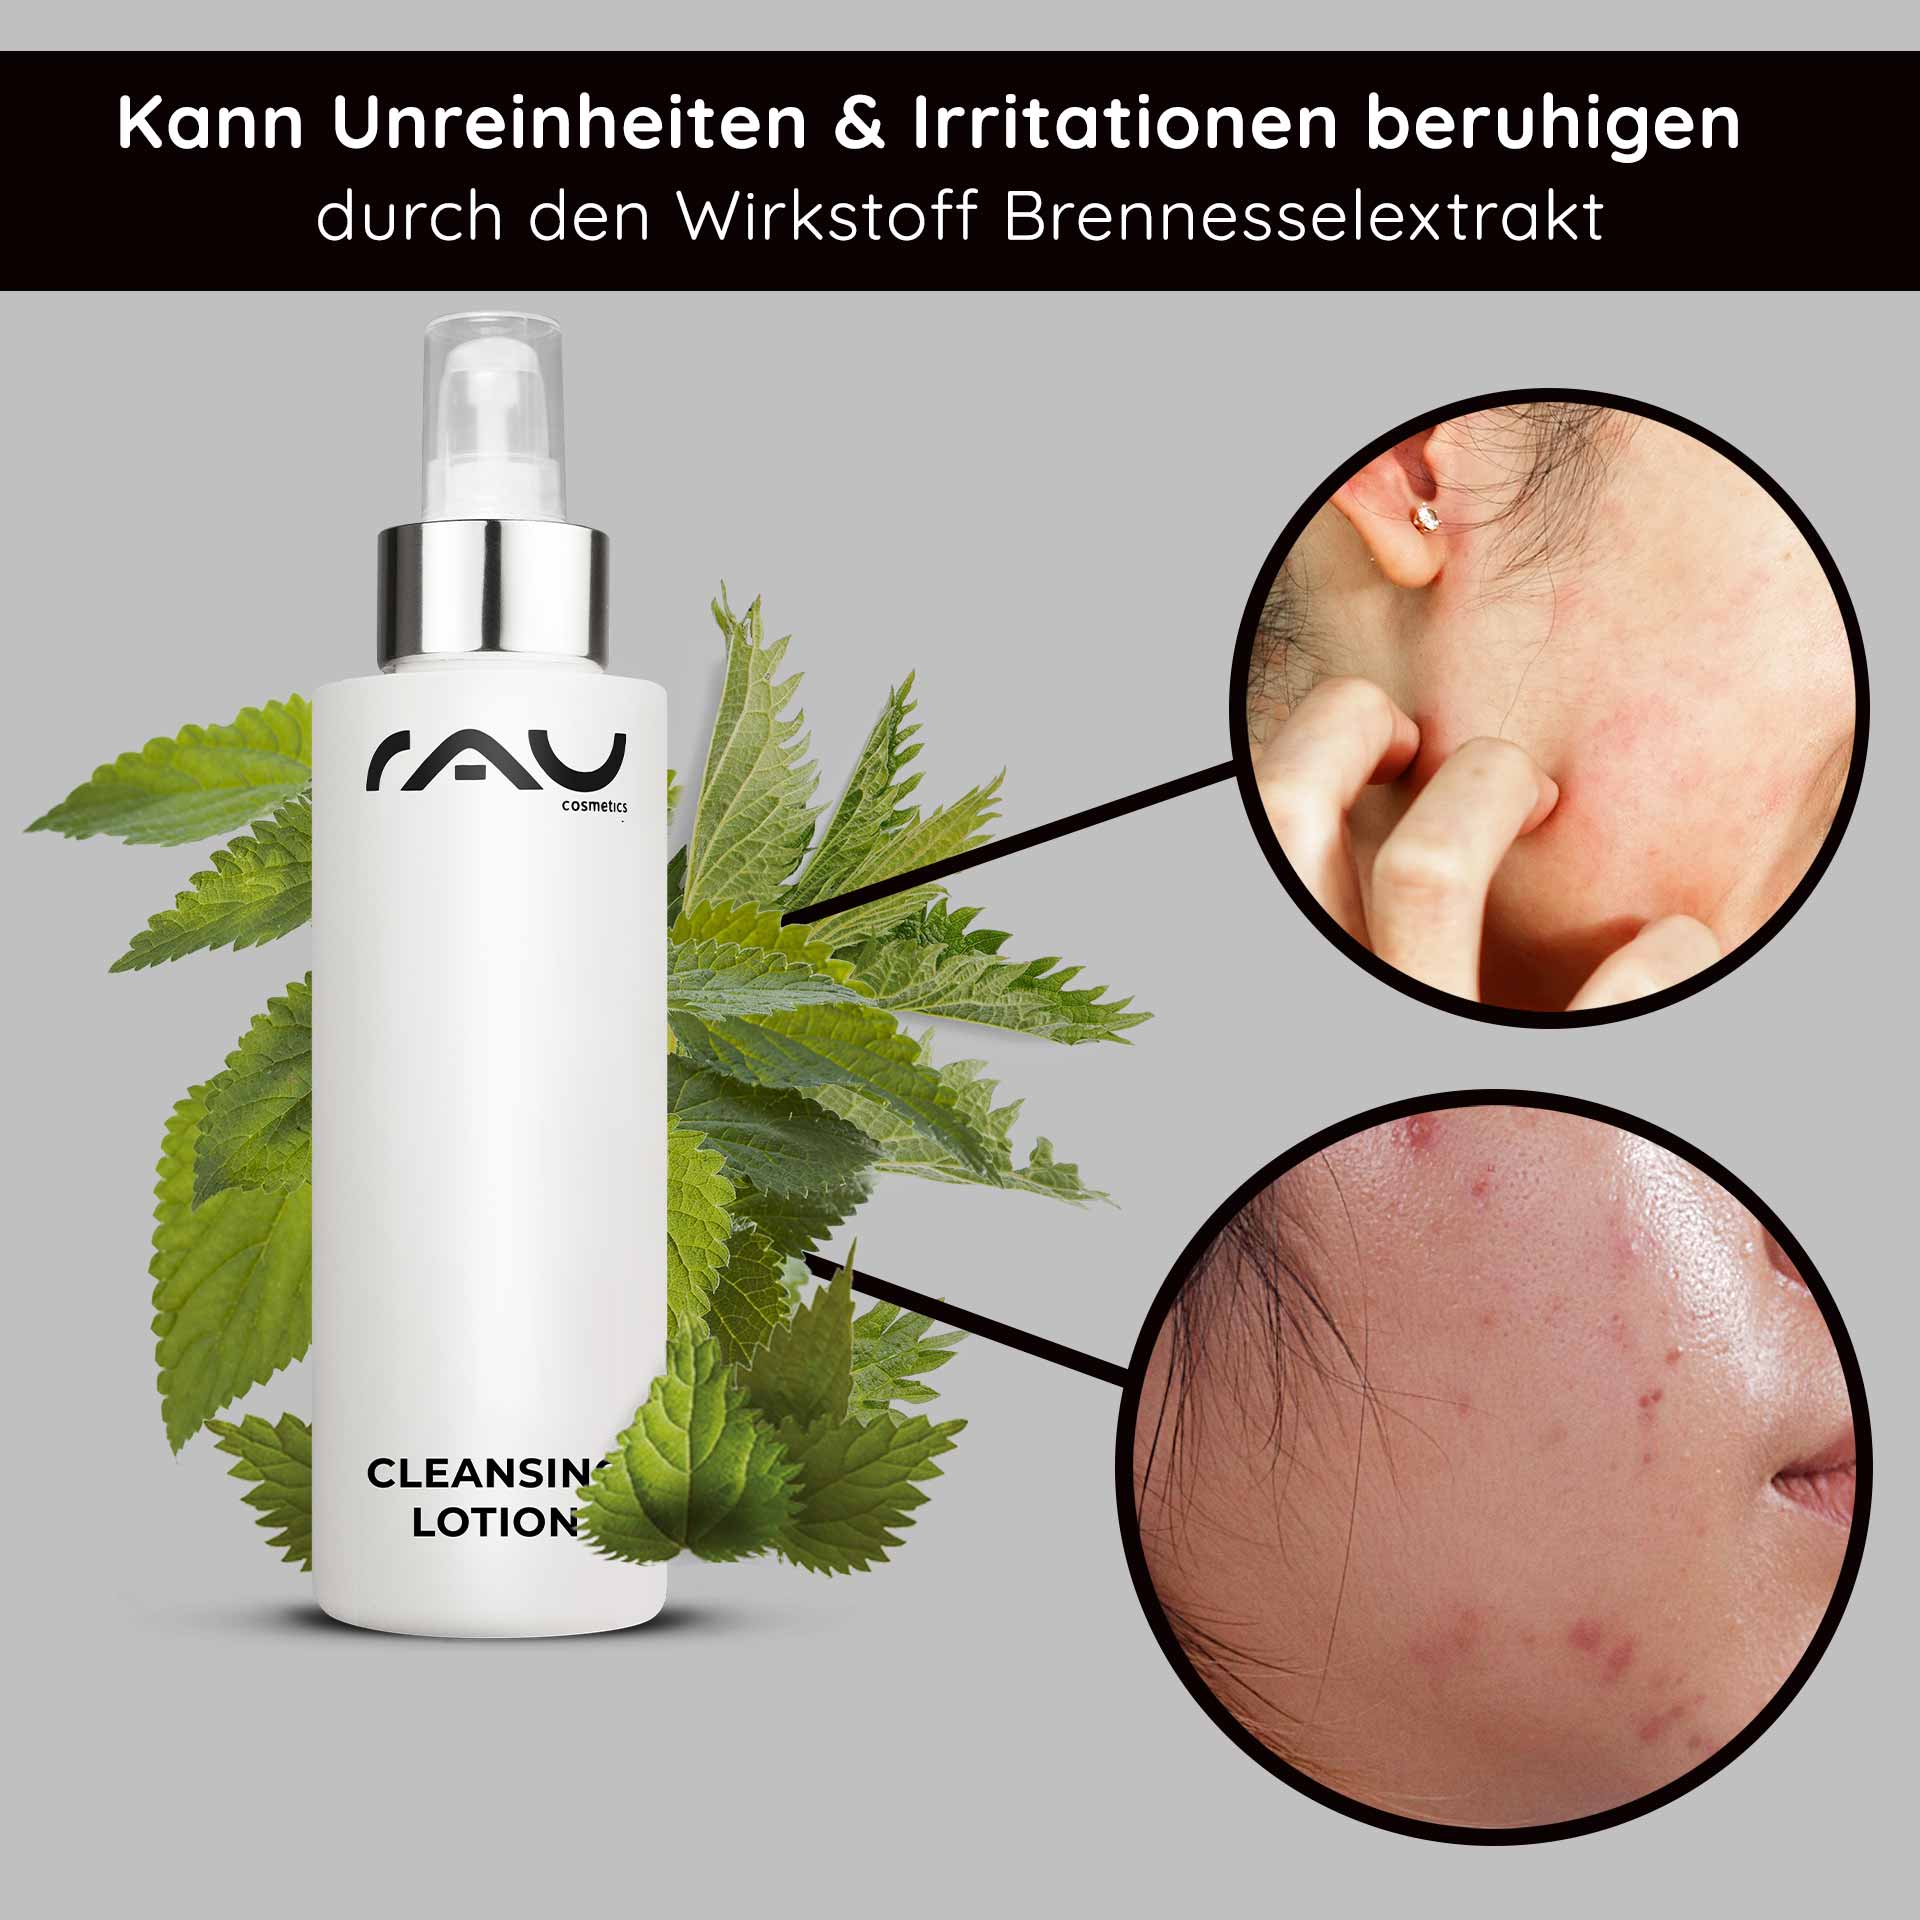 RAU Cleansing Lotion 200 ml - Cleansing Milk with Nettle Extract